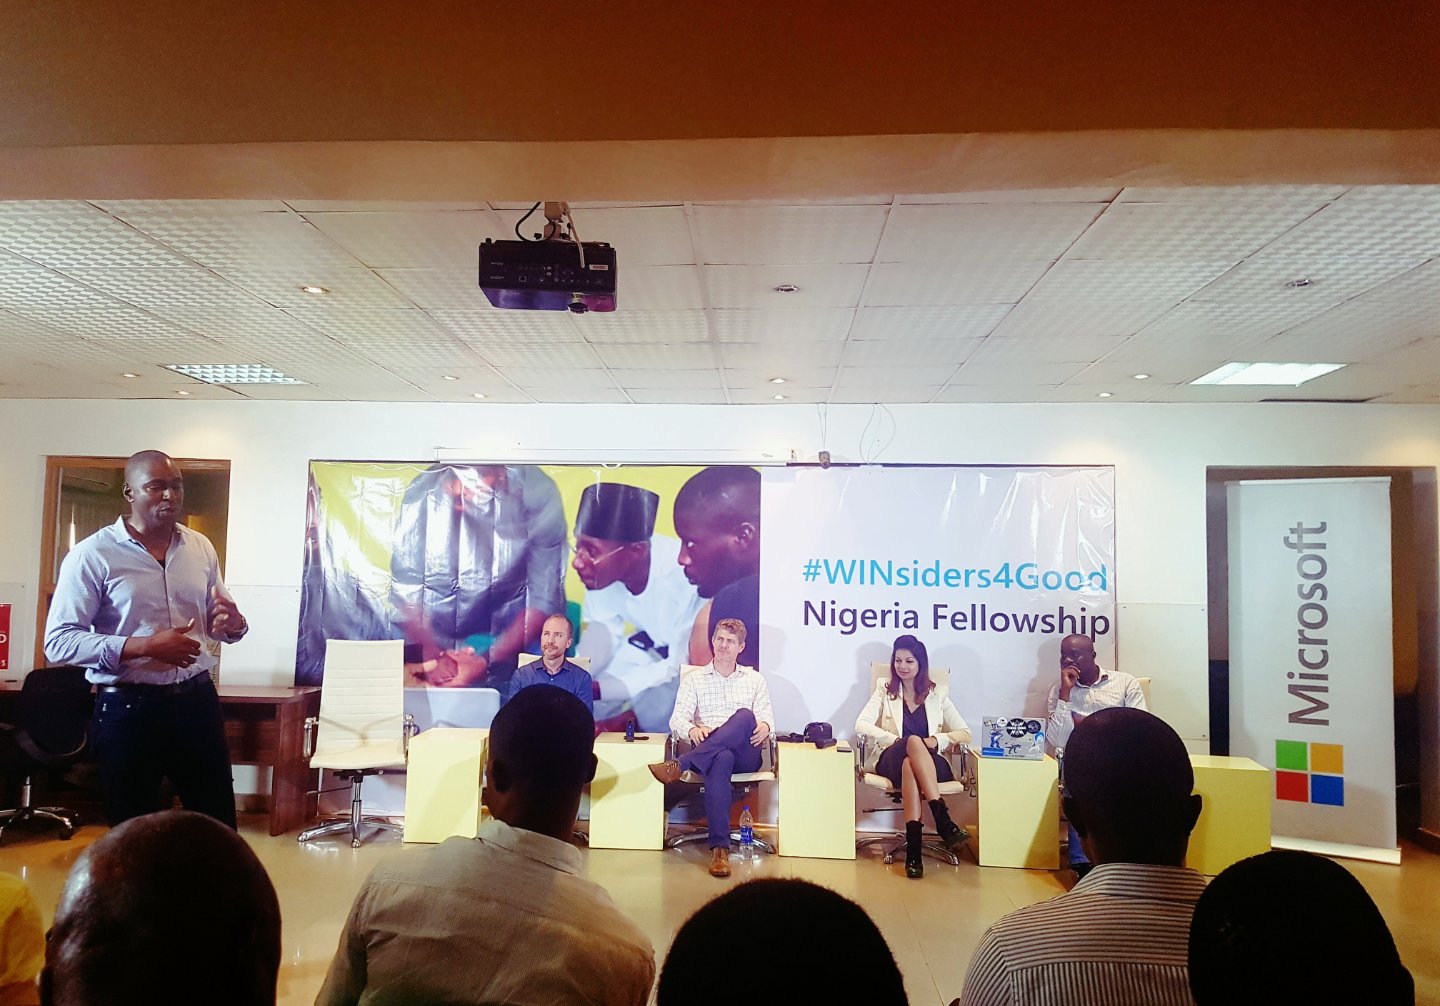 WINsiders4Good Nigeria Fellowship Launched